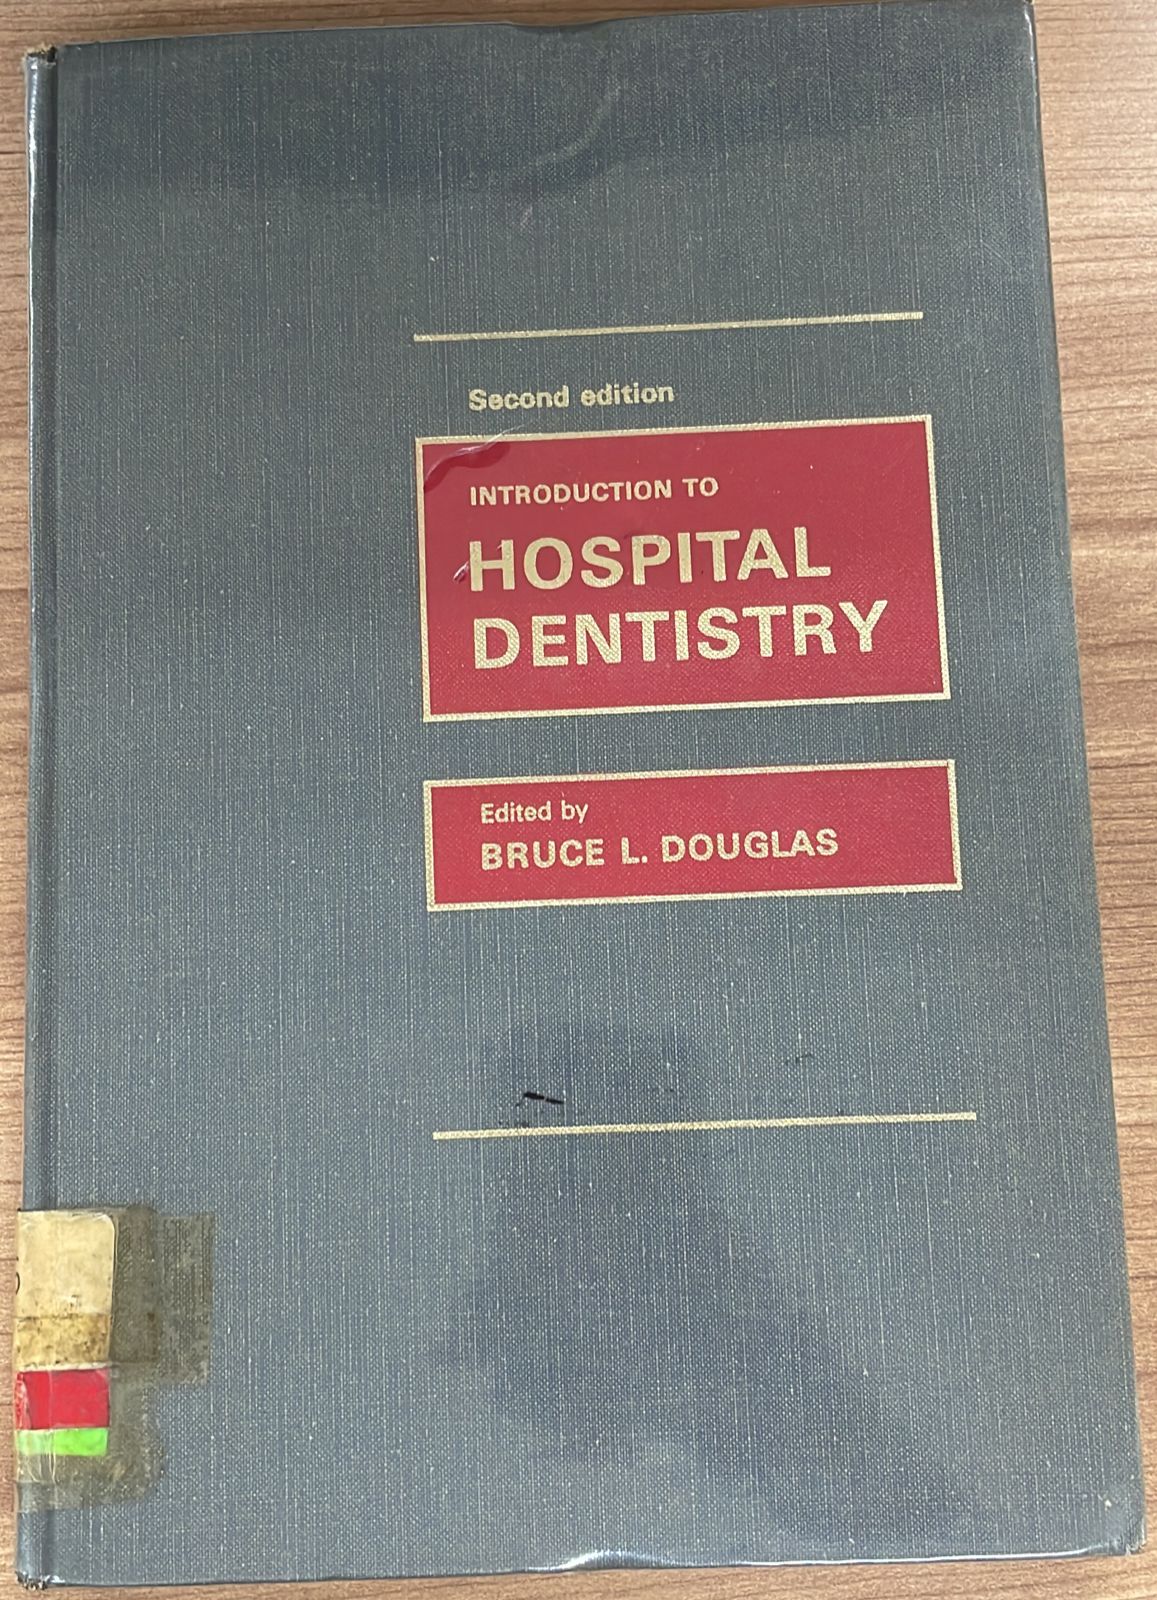 Introduction to Hospital Dentistry